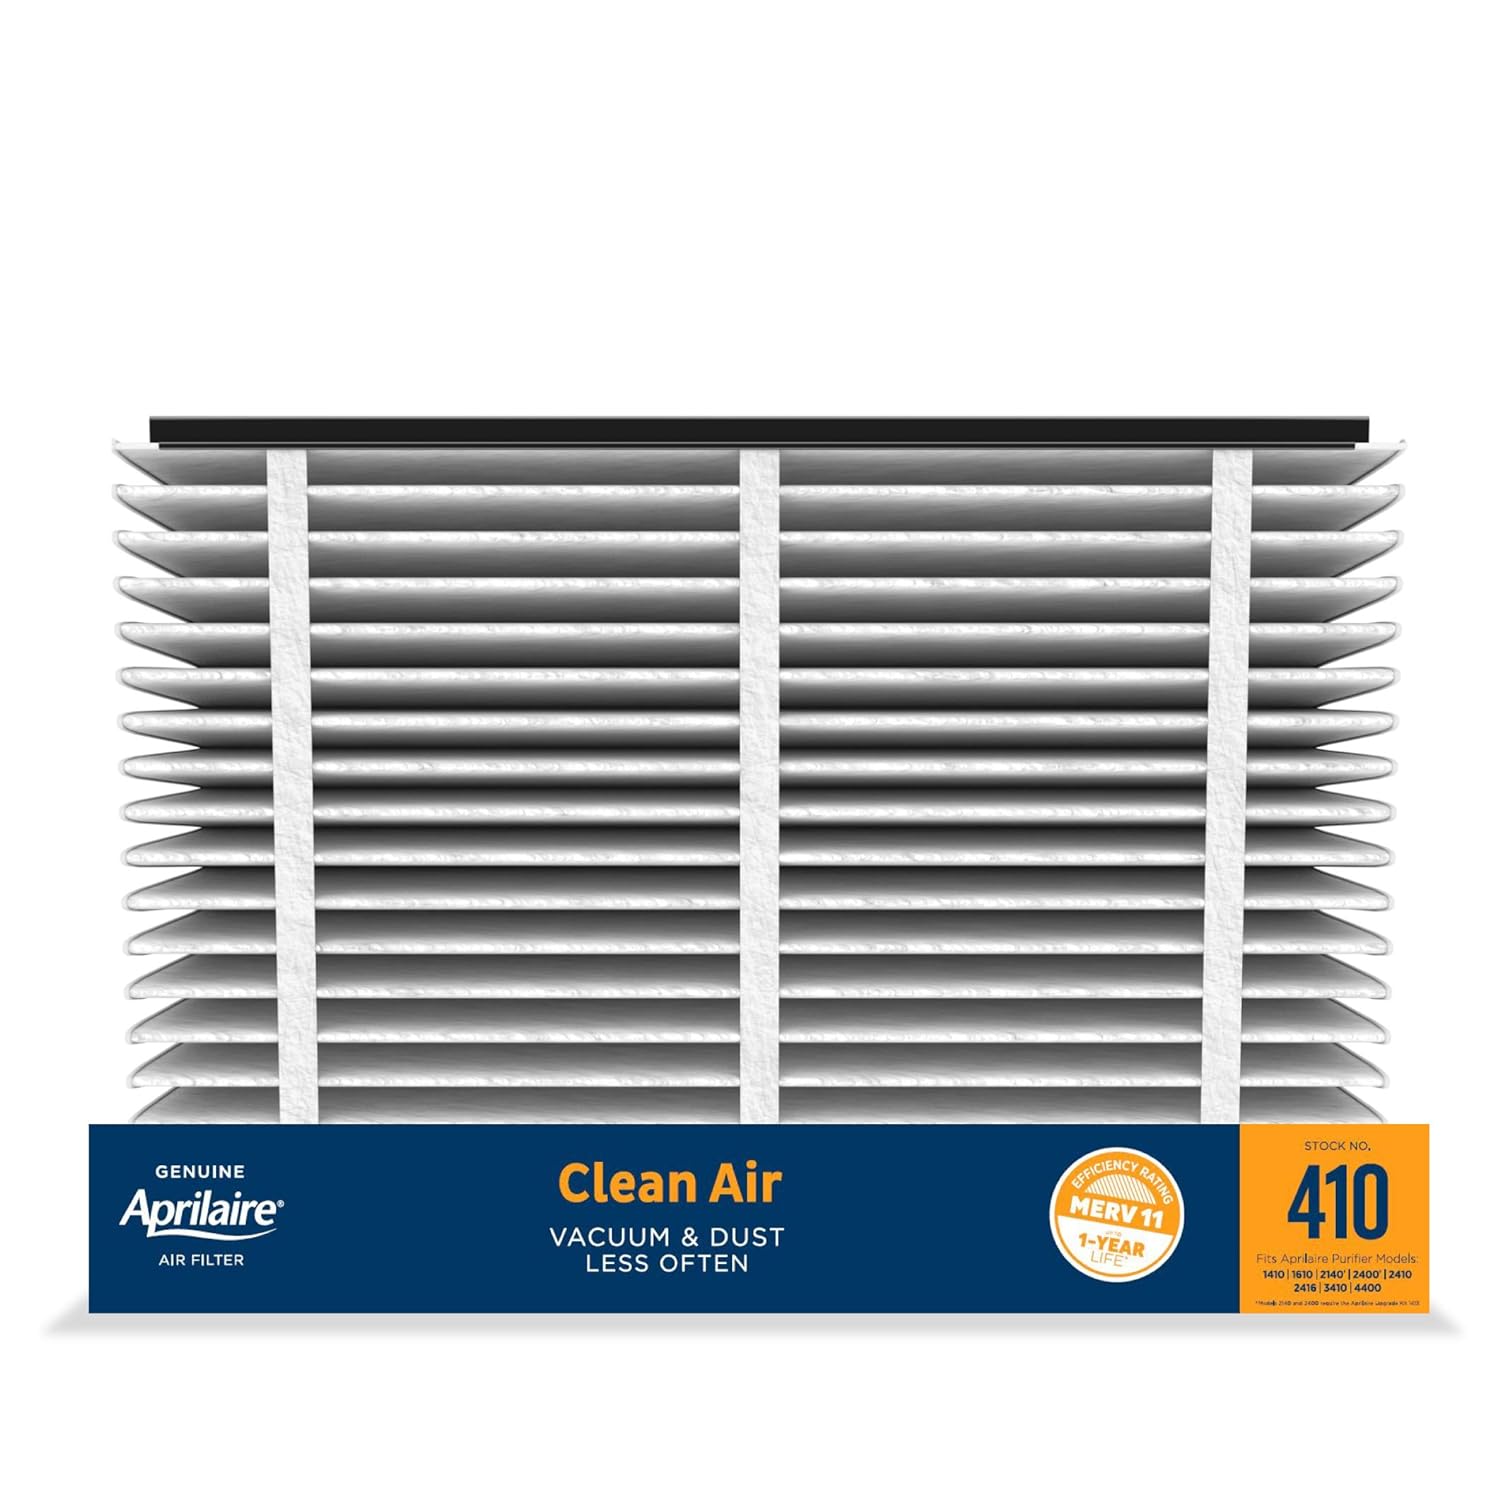 This filter is what my HVAC unit requires. It is less expensive to order from Amazon than having the HVAC people order the filter. It traps a lot of dust. Because I live in an older house and have pets, I change the filter 3x a year, however the recommendation would be 2x a year in most houses.